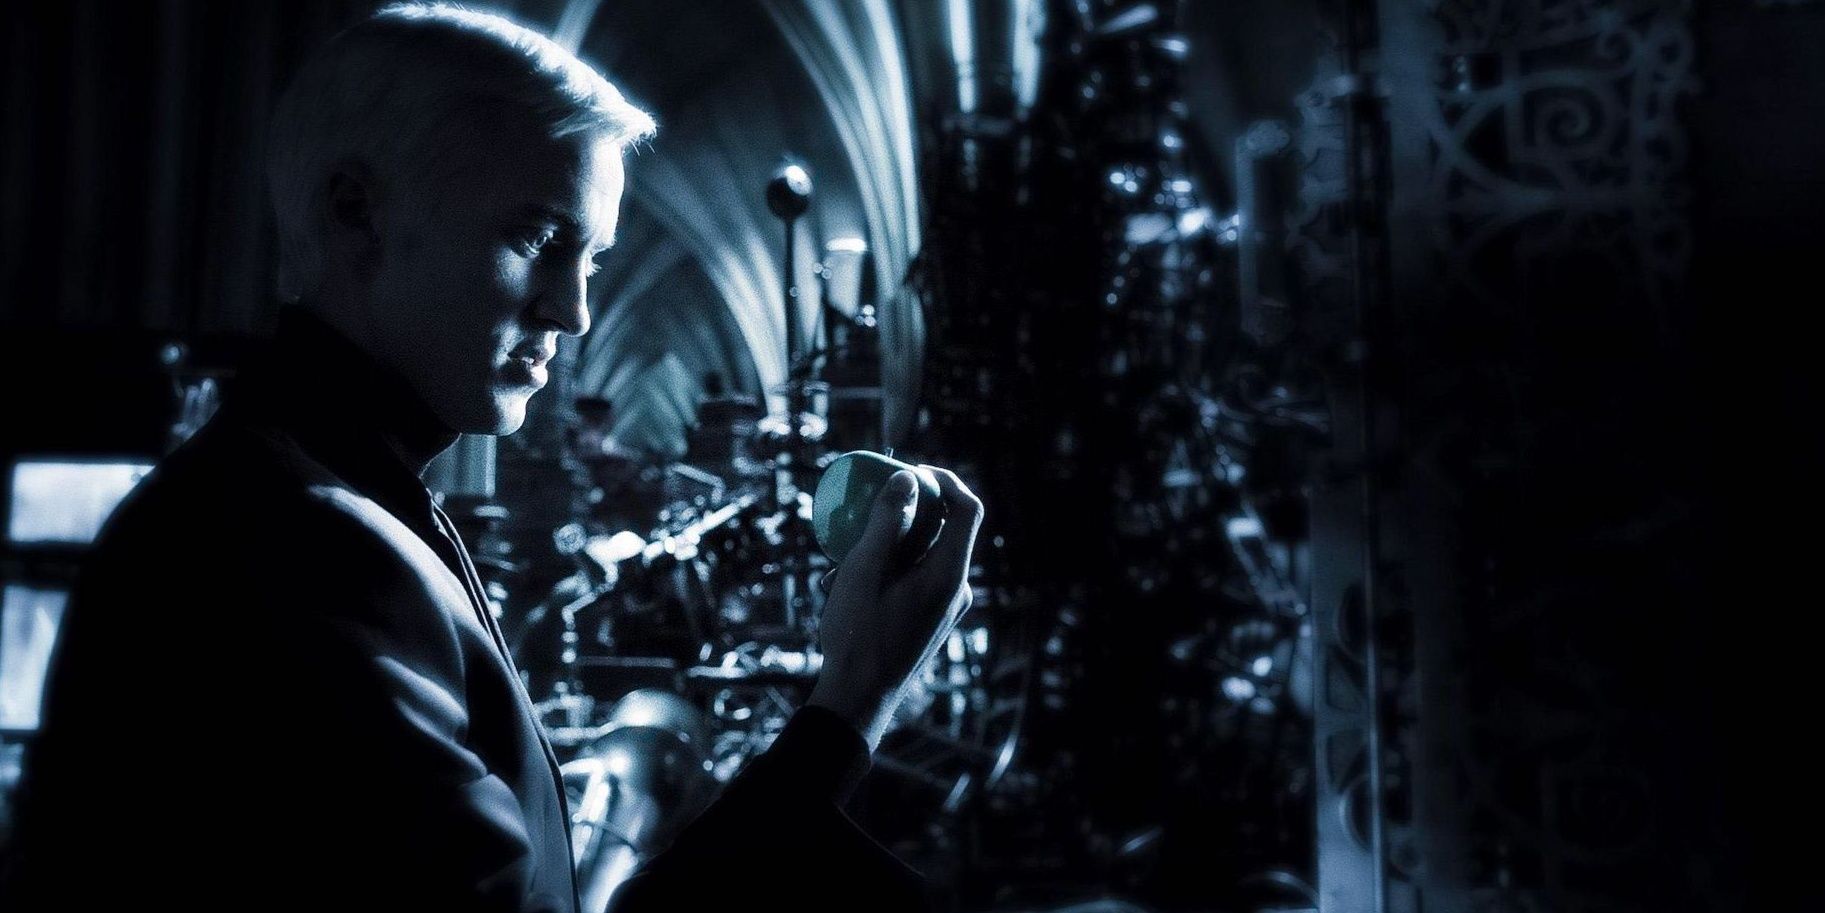 Harry Potter 10 Ways David Yates Changed The Film Series For The Better